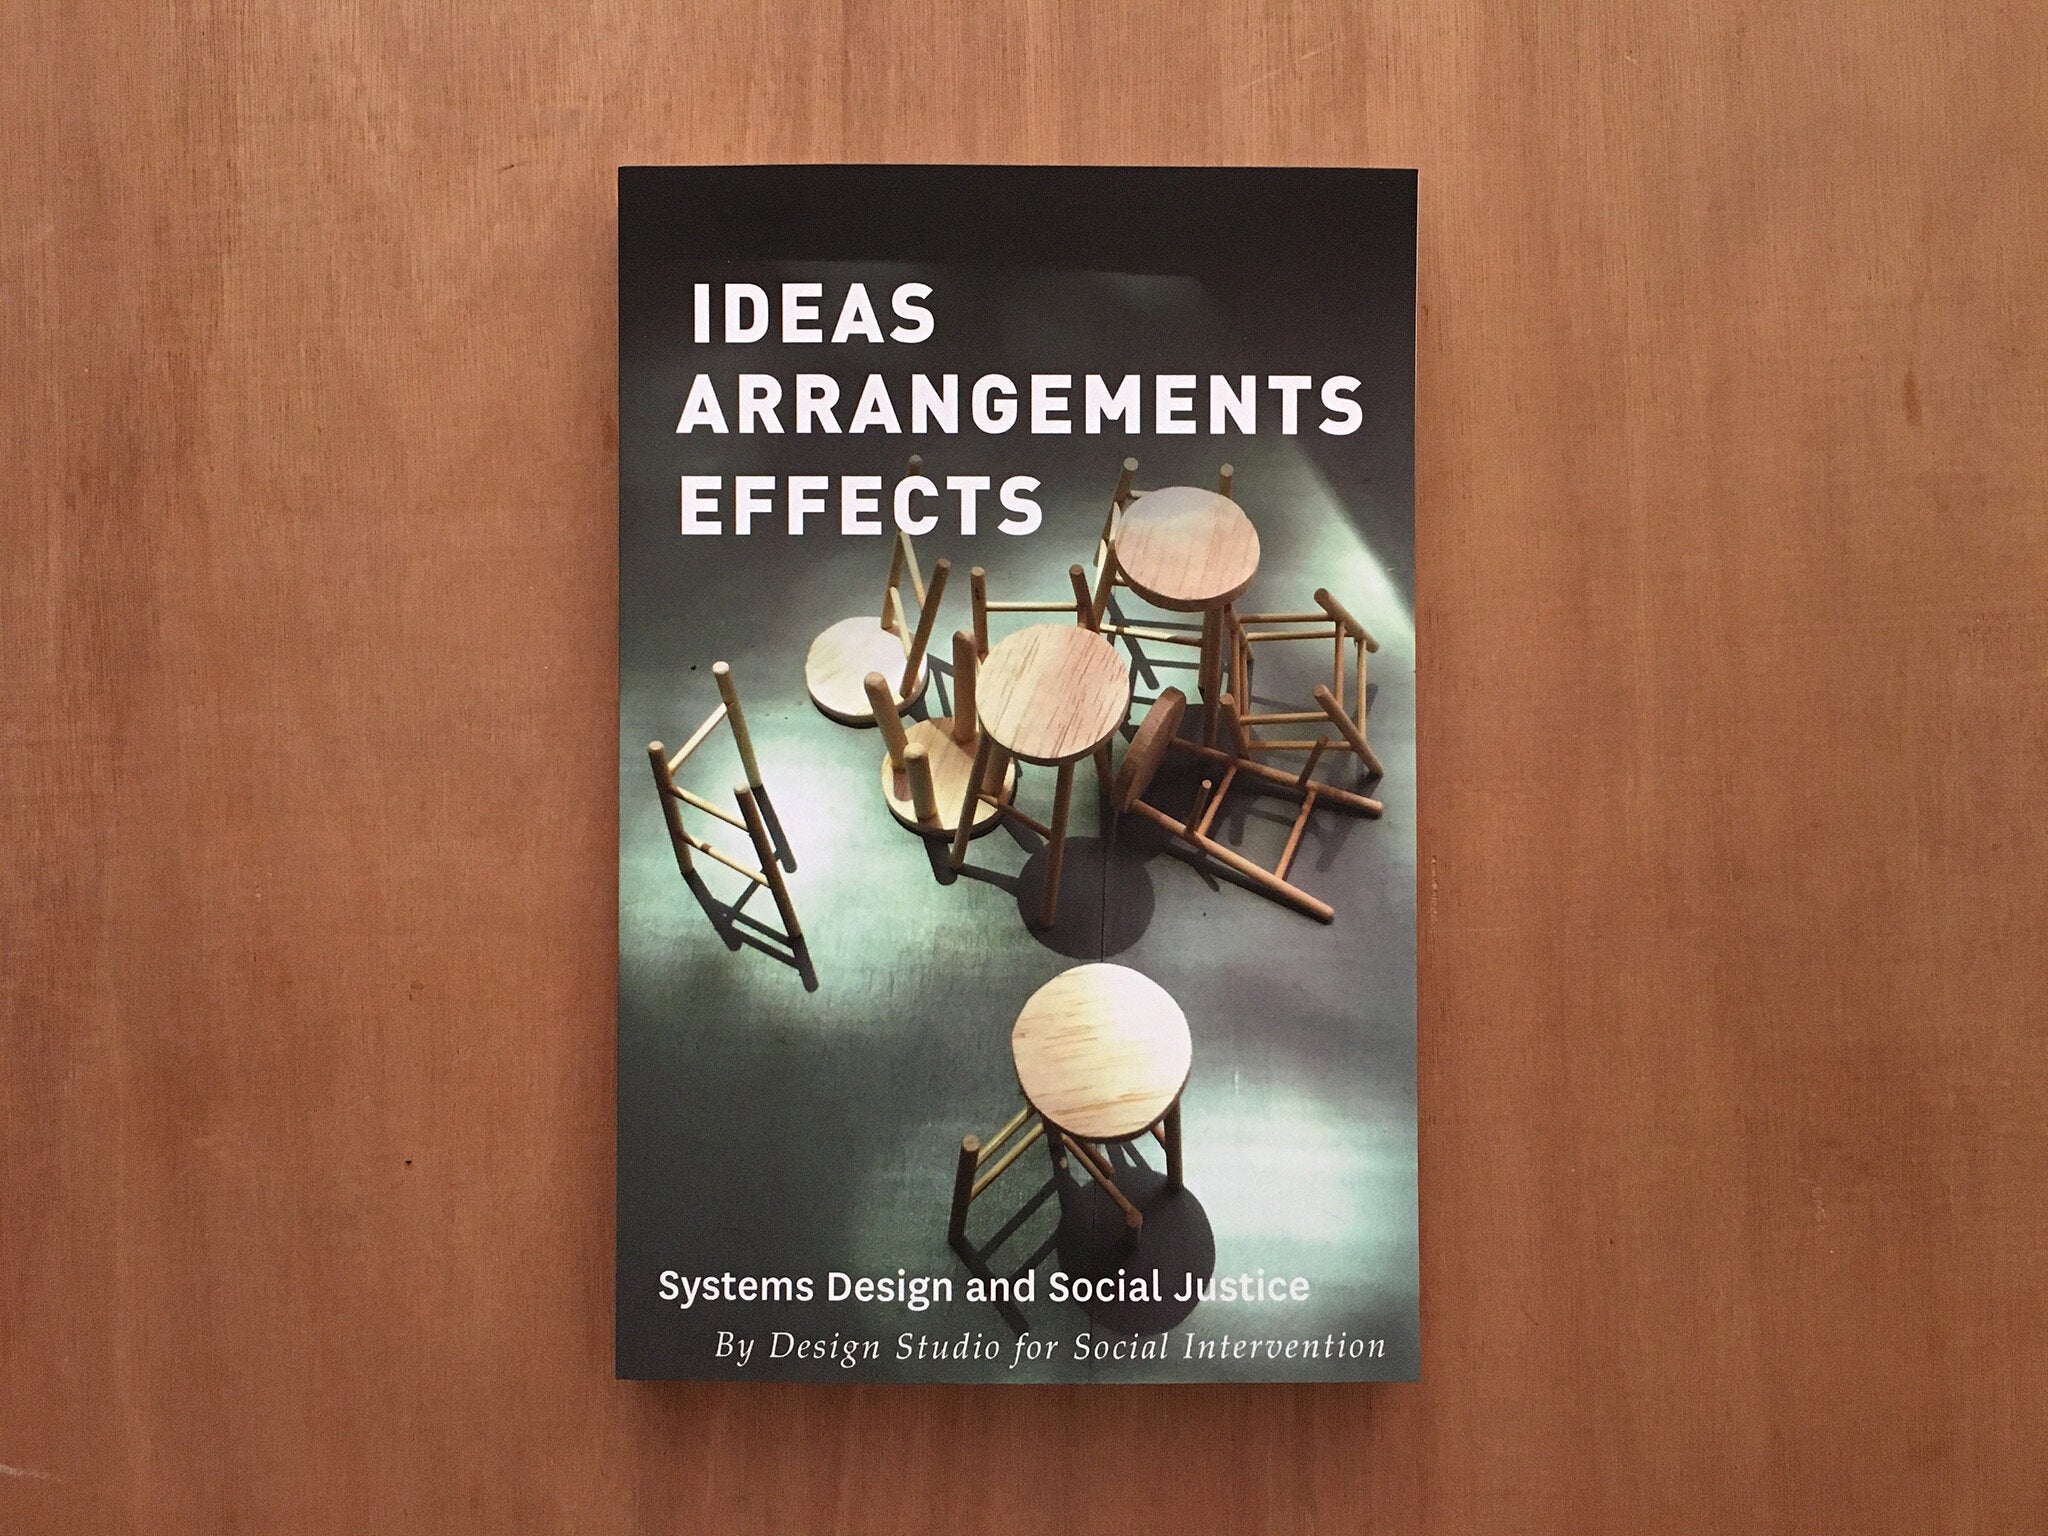 IDEAS ARRANGEMENTS EFFECTS: SYSTEMS DESIGN AND SOCIAL JUSTICE by The Design Studio for Social Intervention